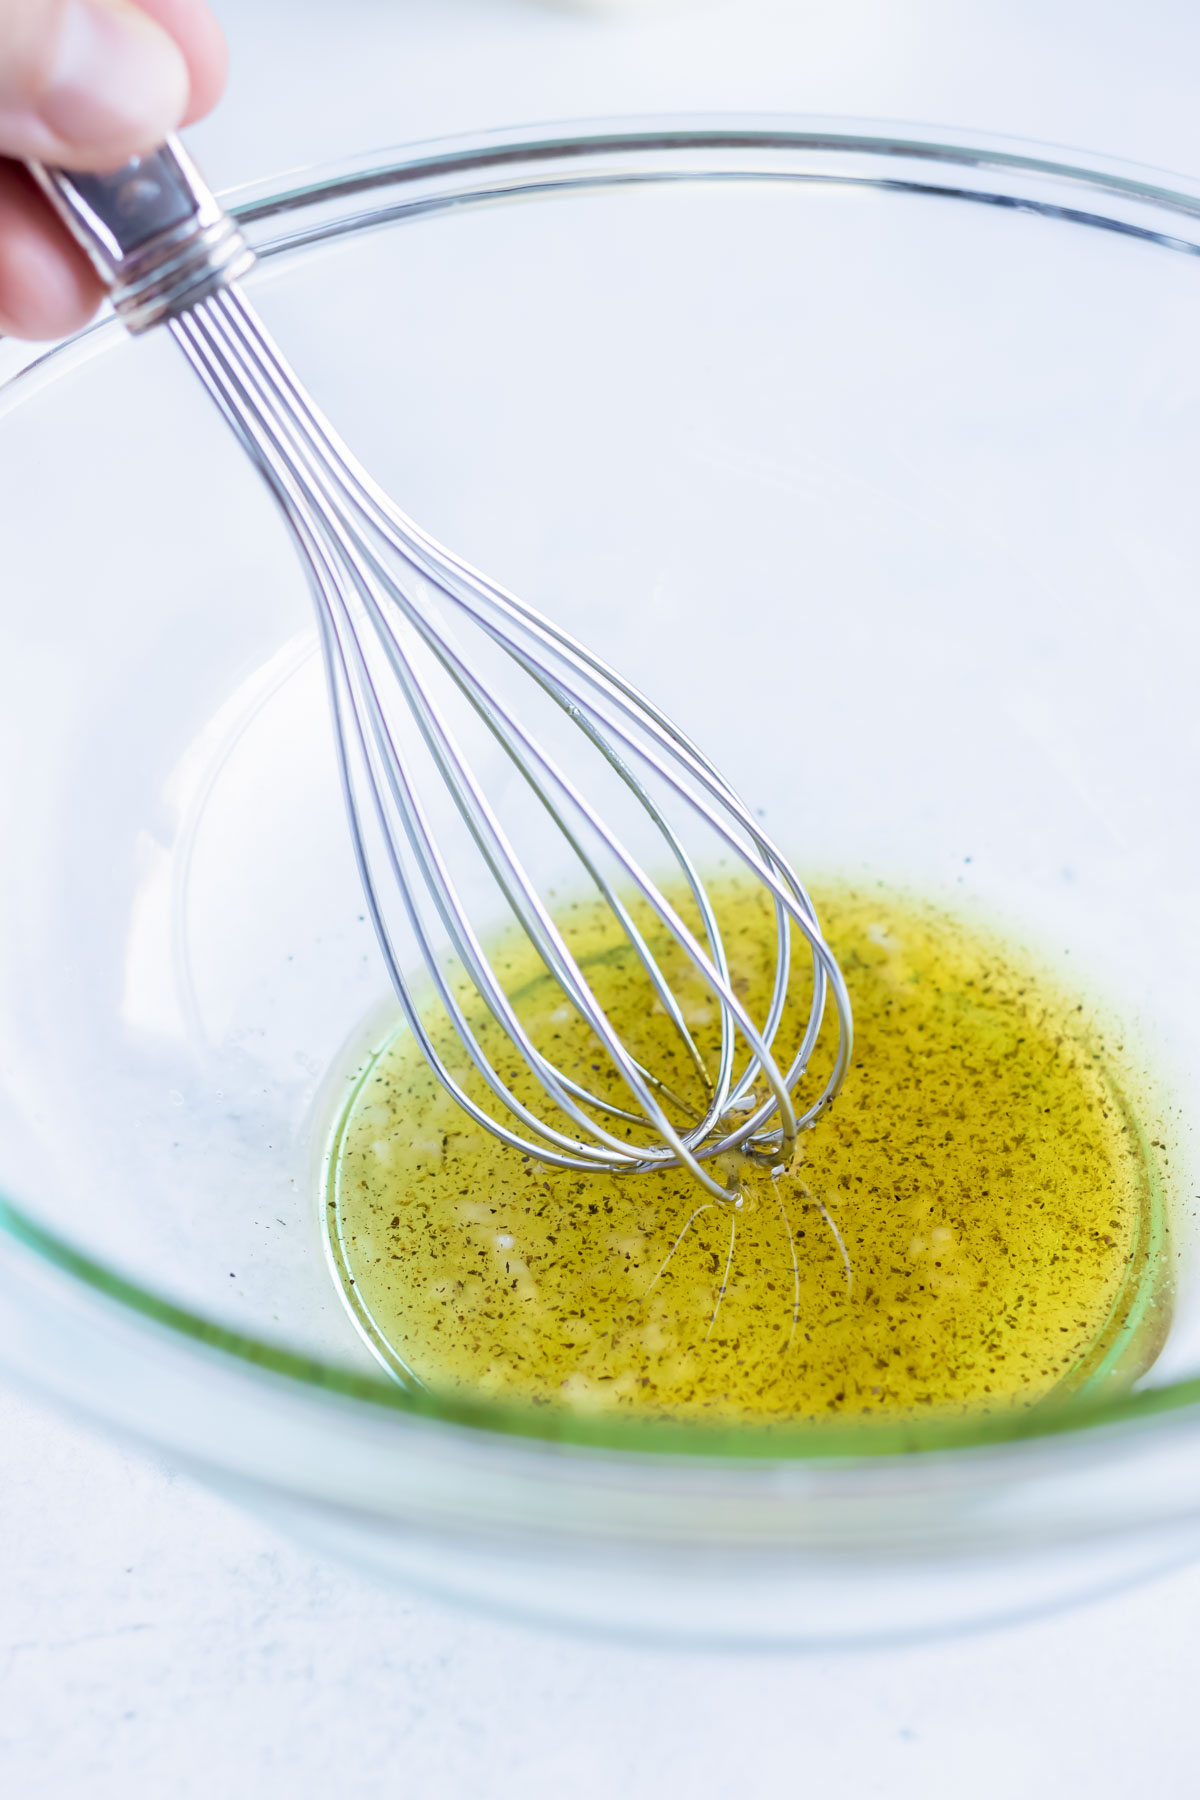 Oil, garlic, salt, and pepper are whisked together in a bowl.